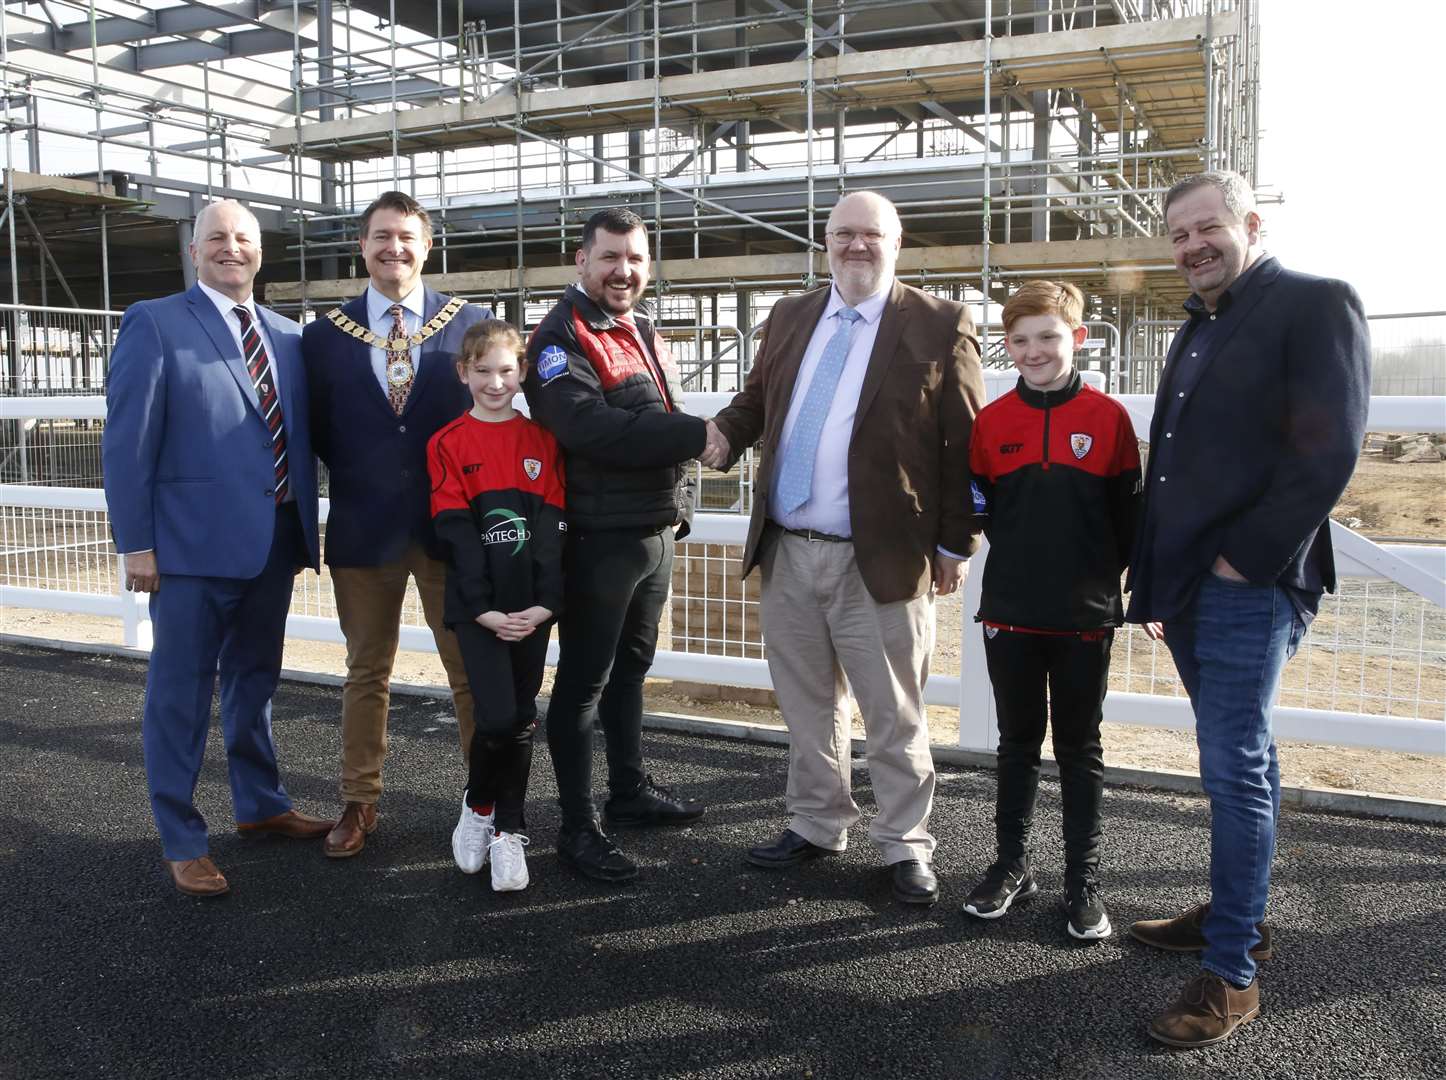 From left to right: former chairman Stephen Tite, Dartford mayor David Mote, current rugby club chairman Peter Timon, council leader Jeremy Kite and deputy leader Chris Shippam, with youngsters Eva and Oliver. Picture: Dartford council (7441864)